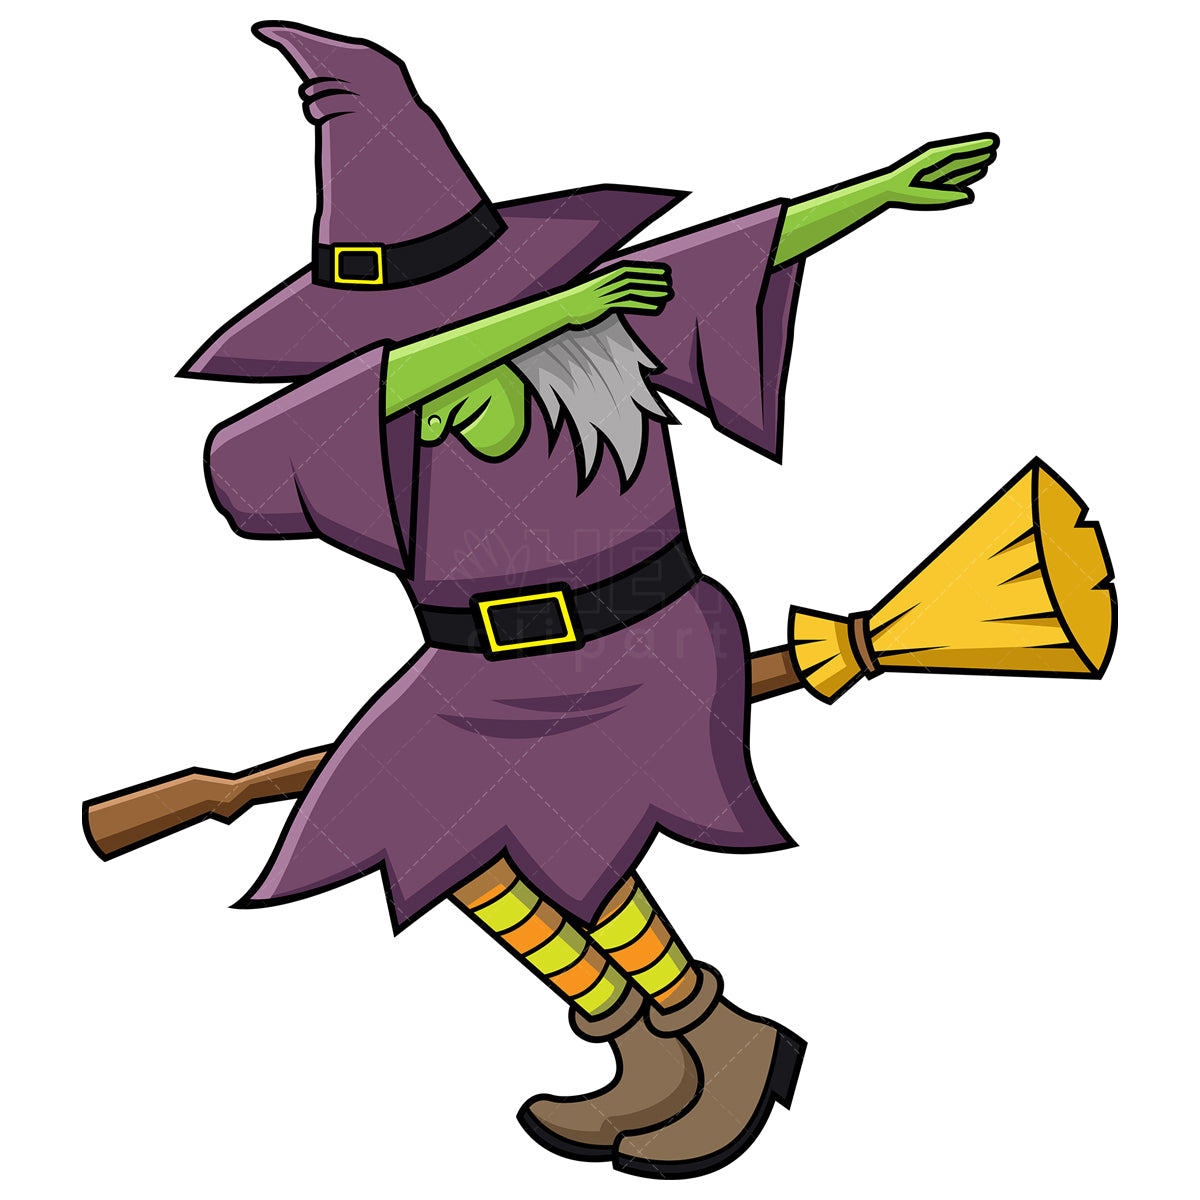 Royalty-free stock vector illustration of a dabbing witch.